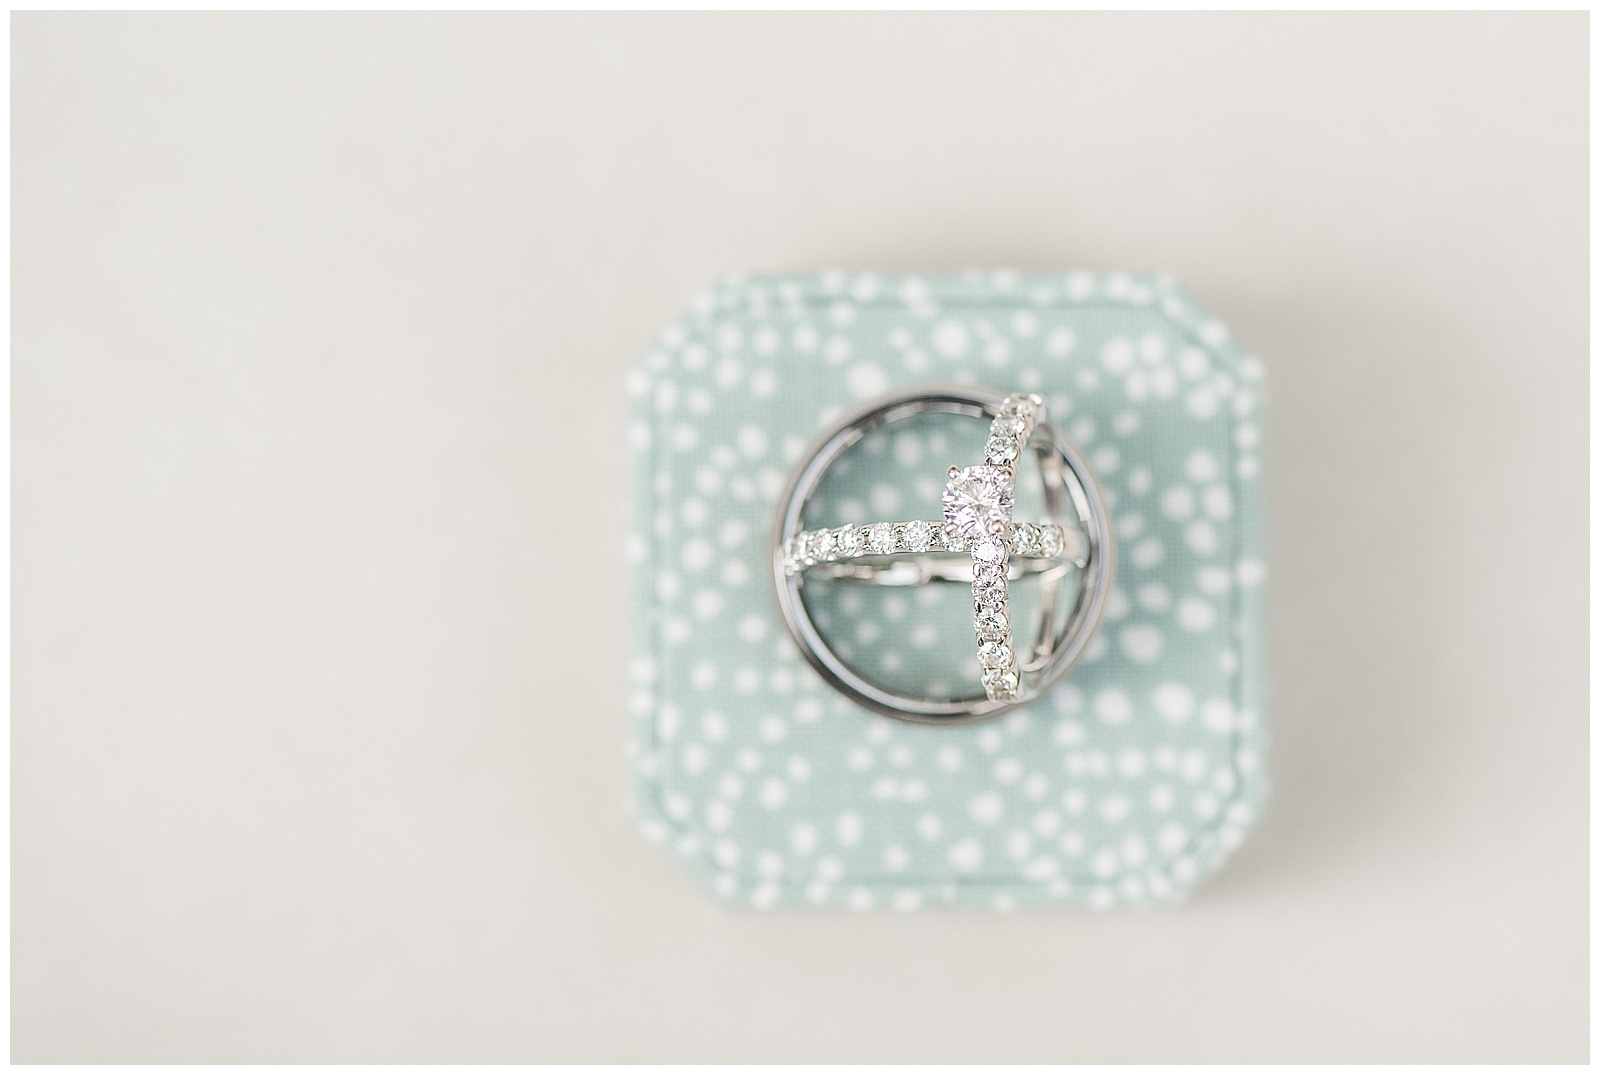 silver wedding rings displayed atop mint green with small white polka dots jewelry box in collegeville pennsylvania